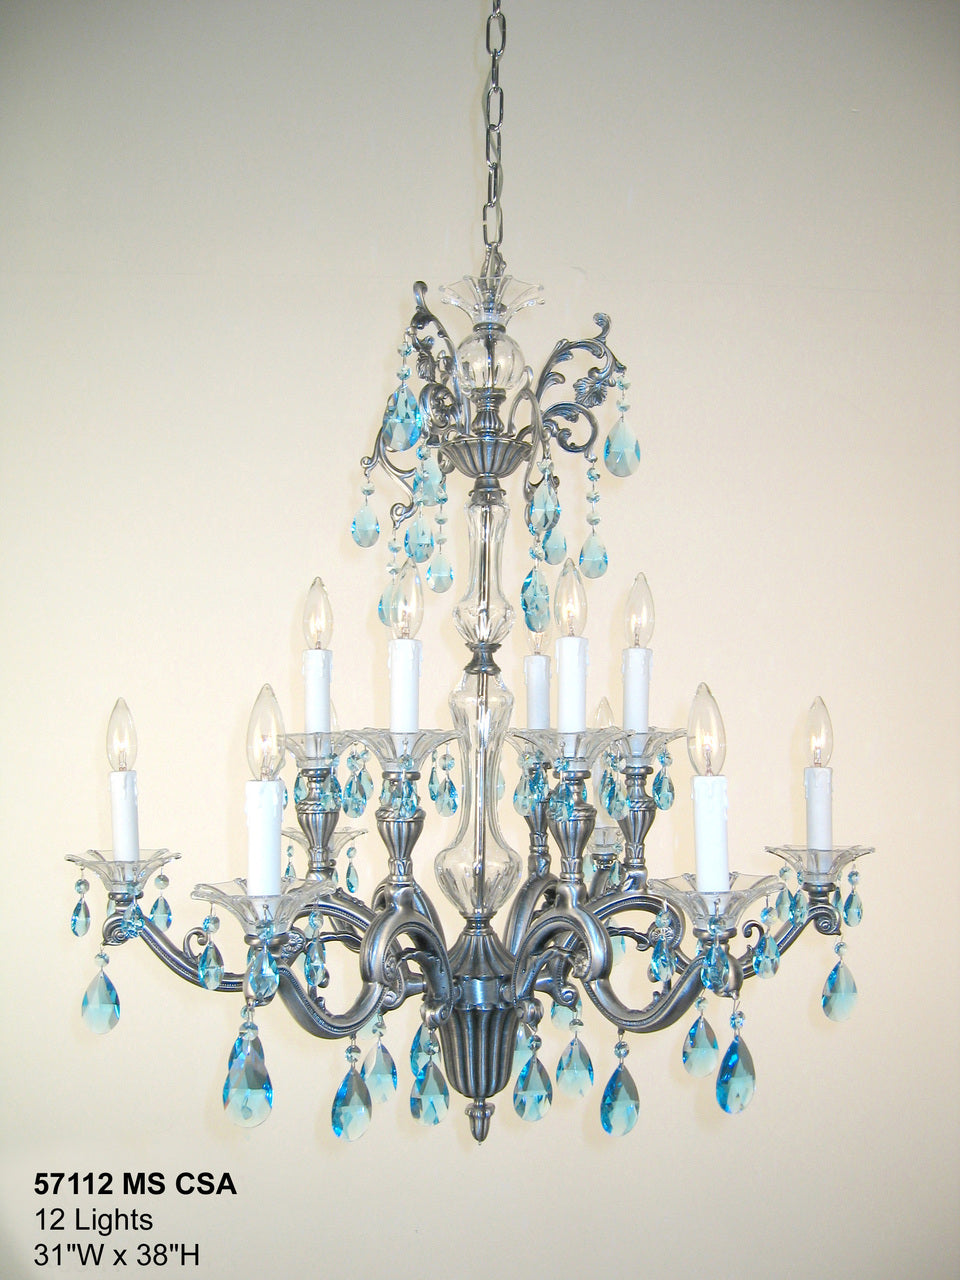 Classic Lighting 57112 MS CSA Via Firenze Crystal Chandelier in Millennium Silver (Imported from Spain)